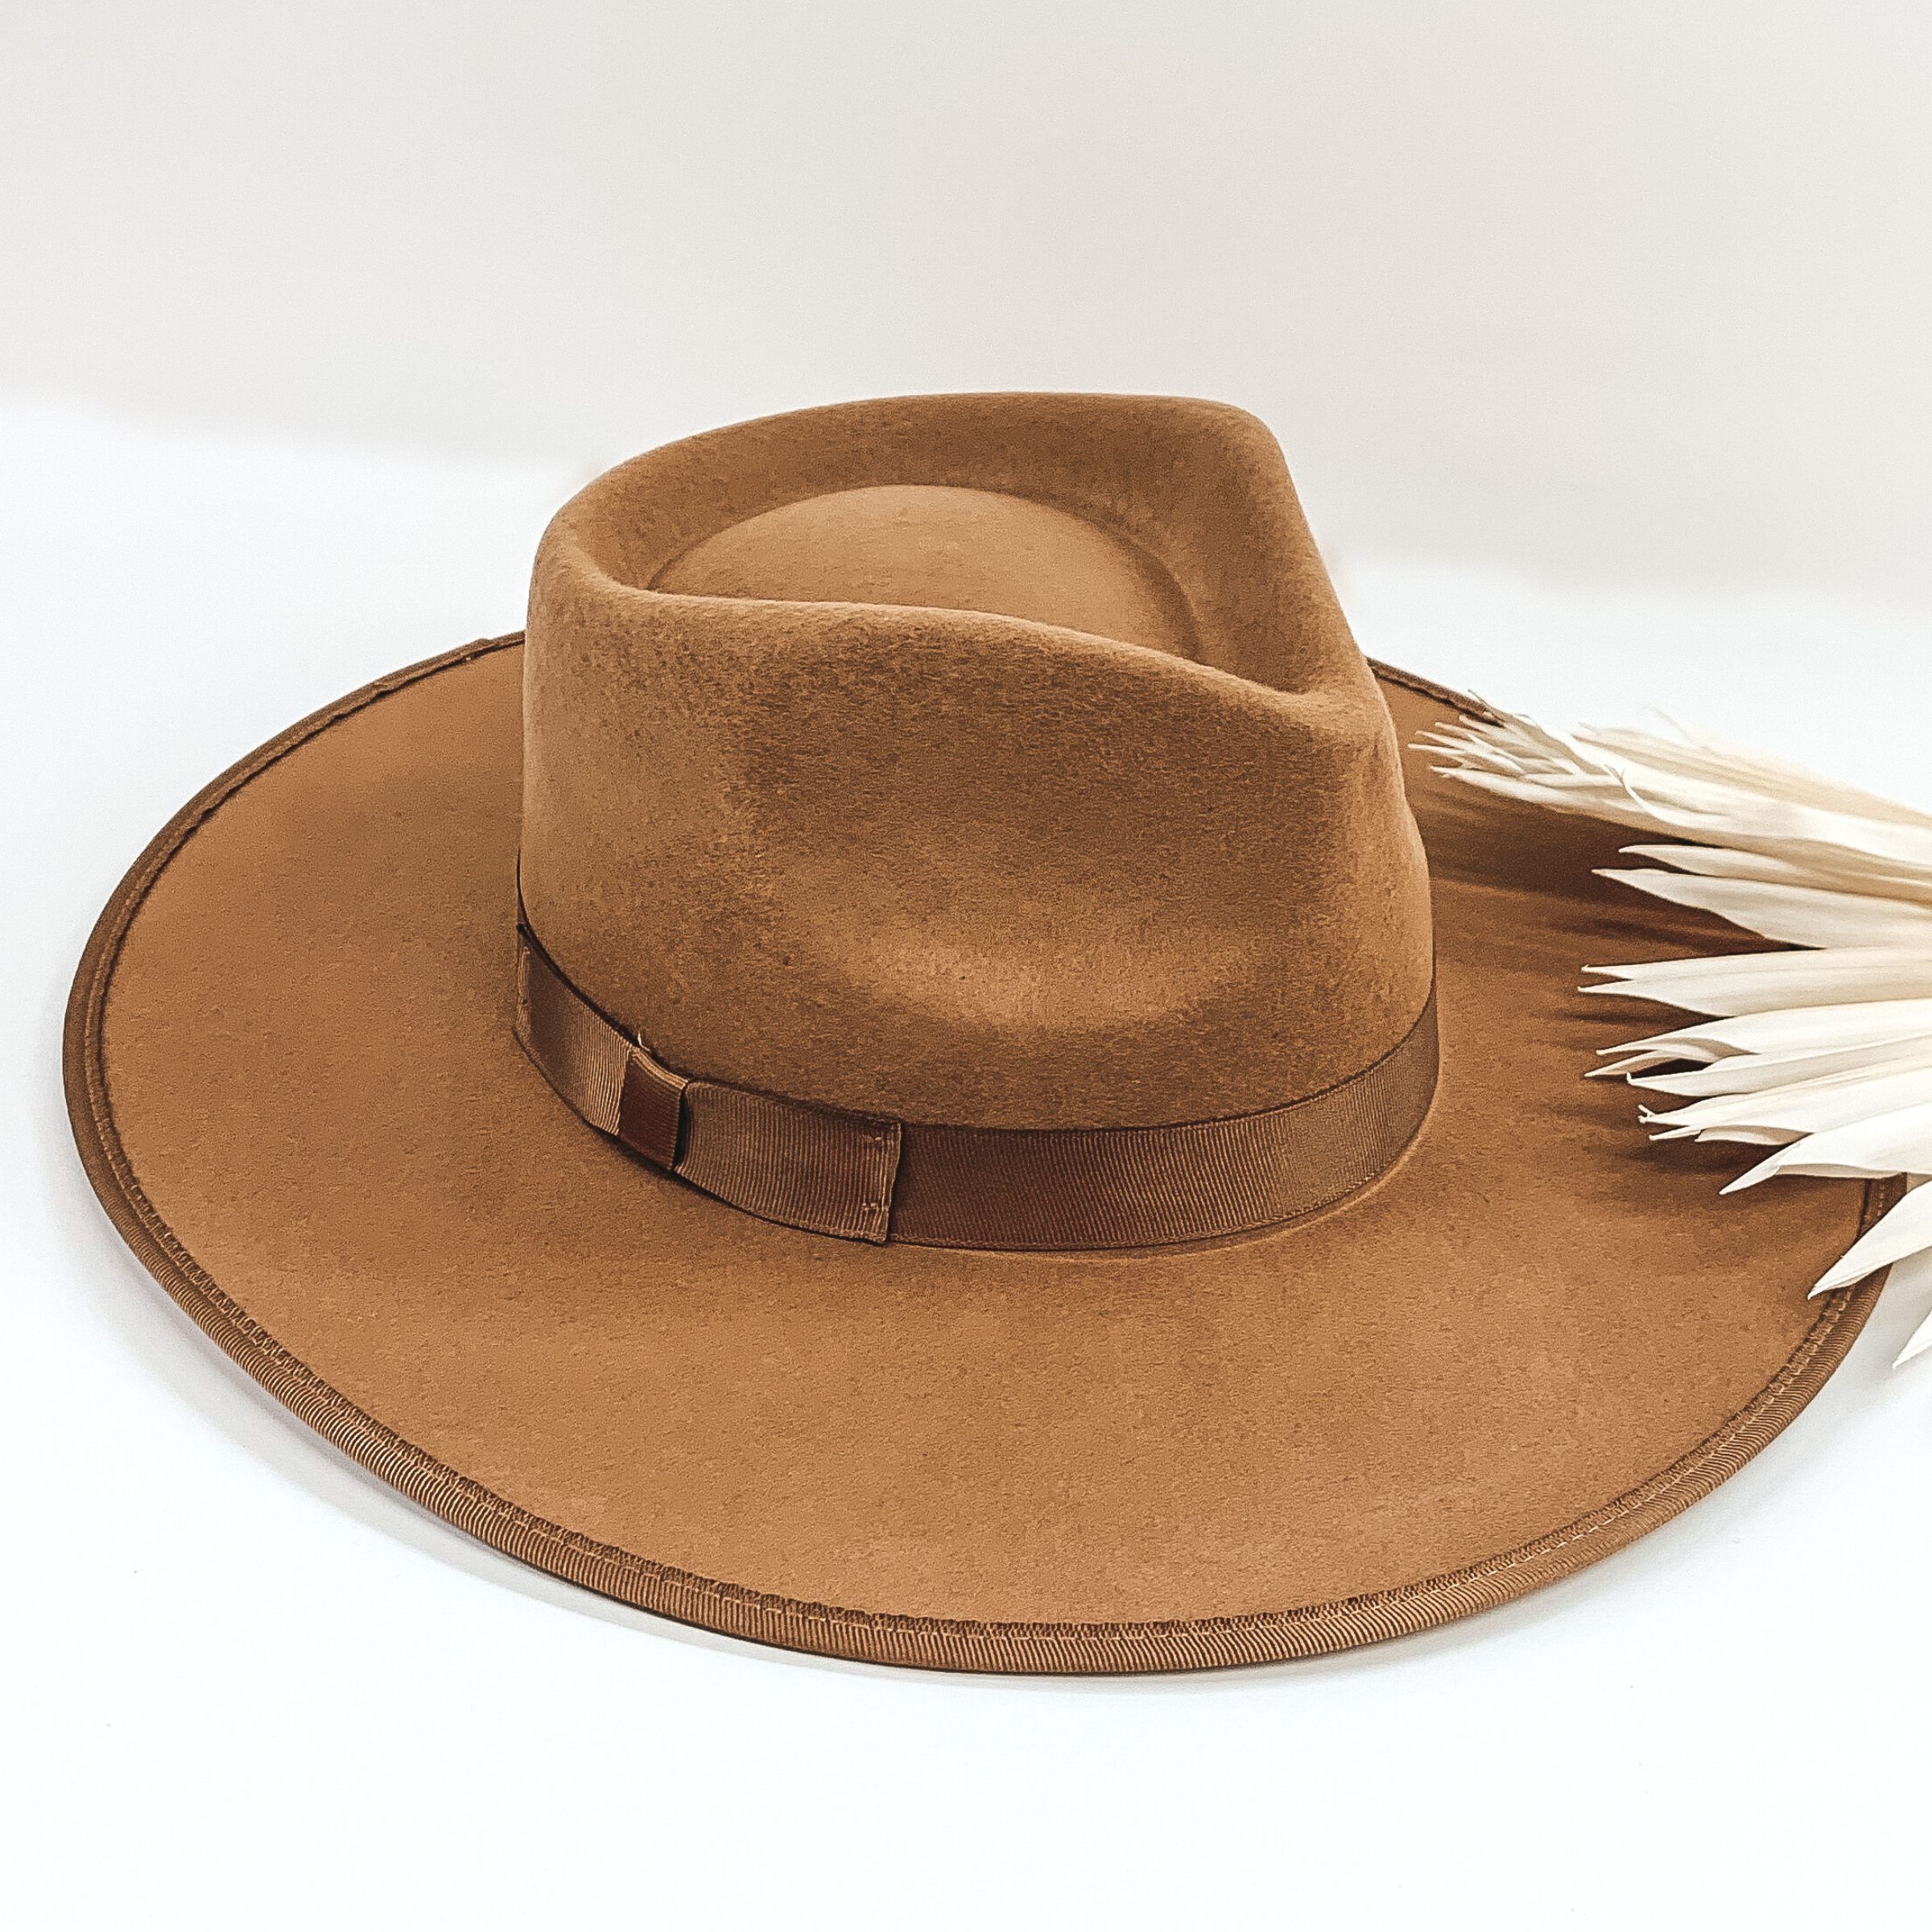 Tan colored hat with a flat brim. The brim has a trimmed outline and the crown has the same colored ribbon wrapped around the bottom. This hat is pictured on a white background with some white leaf decor. 